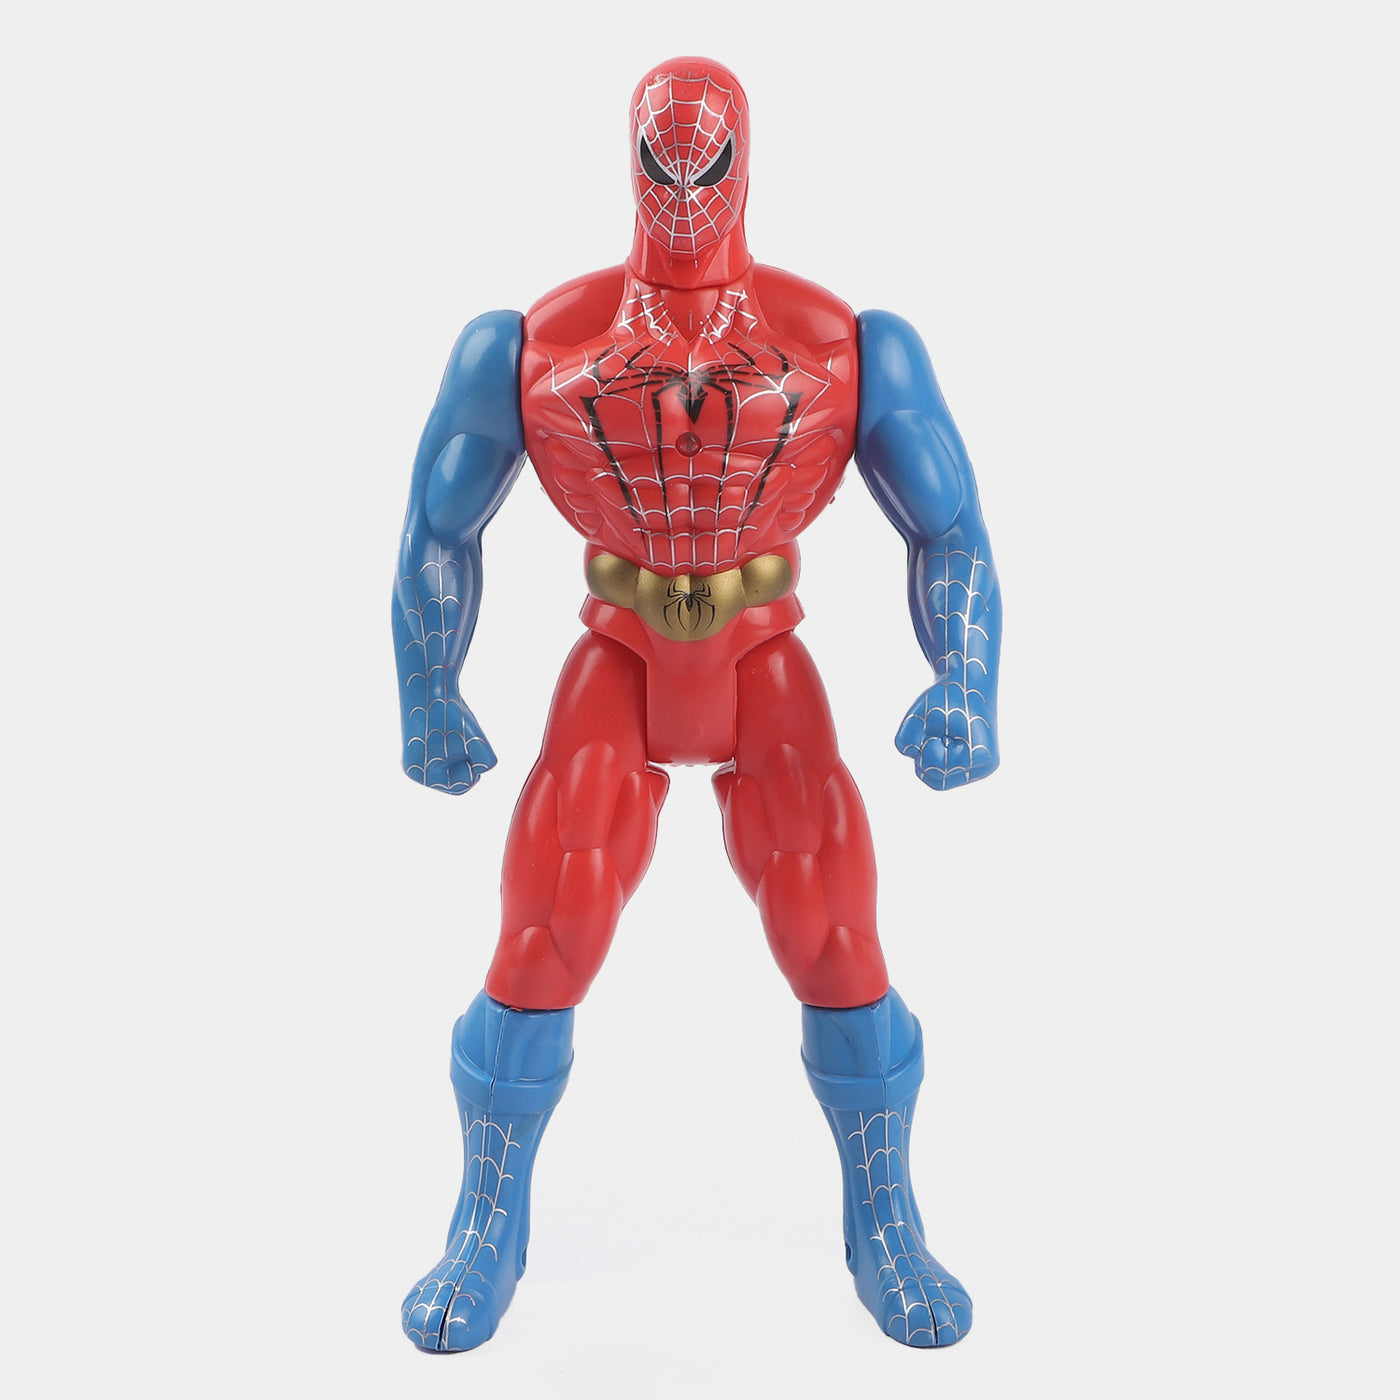 Character Action Figure Toy |